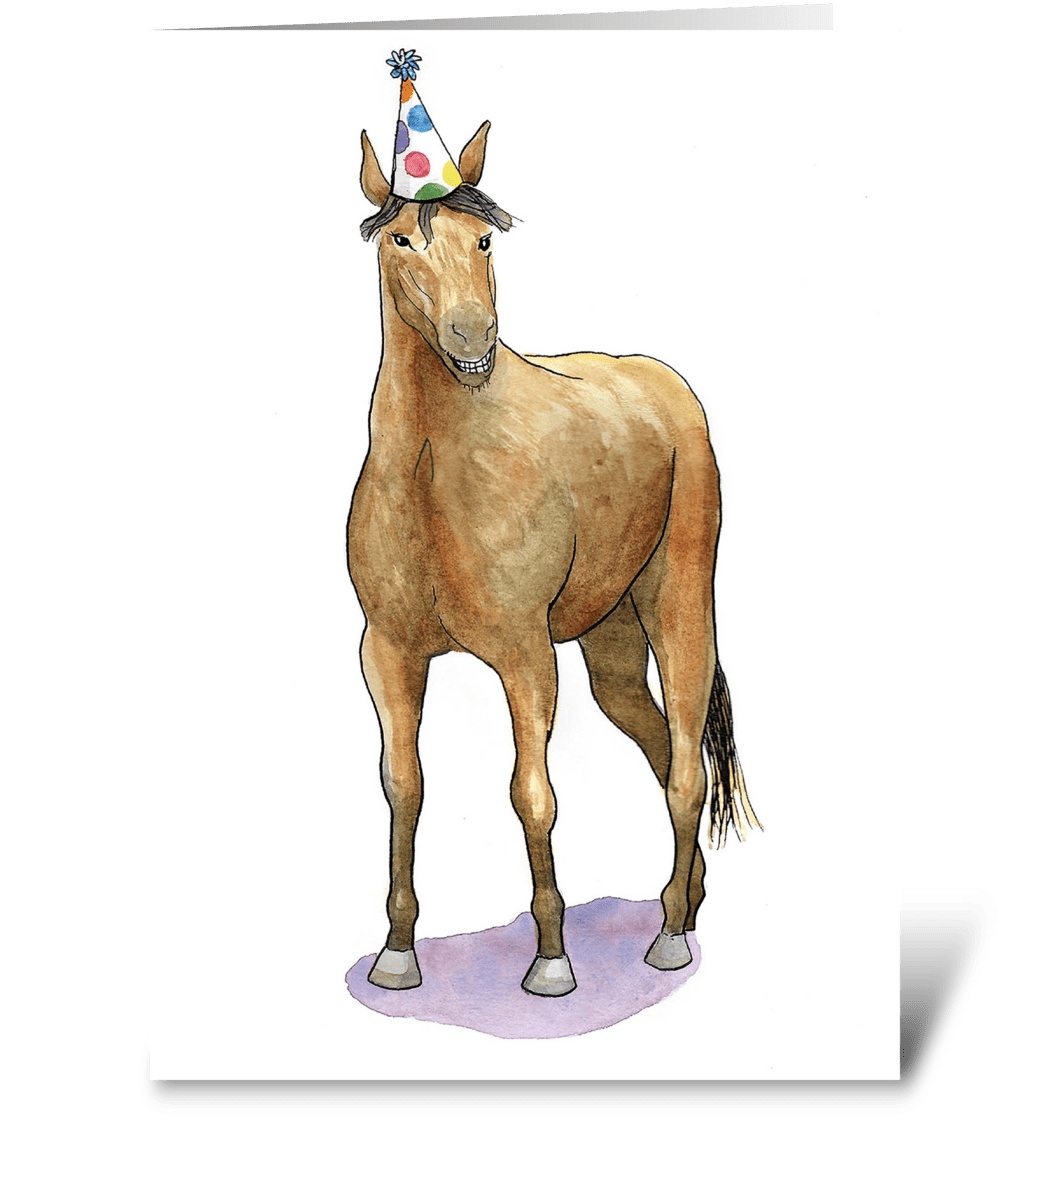 Horse Party Animal - Send this greeting card designed by Barbara Counsil -  Card Gnome